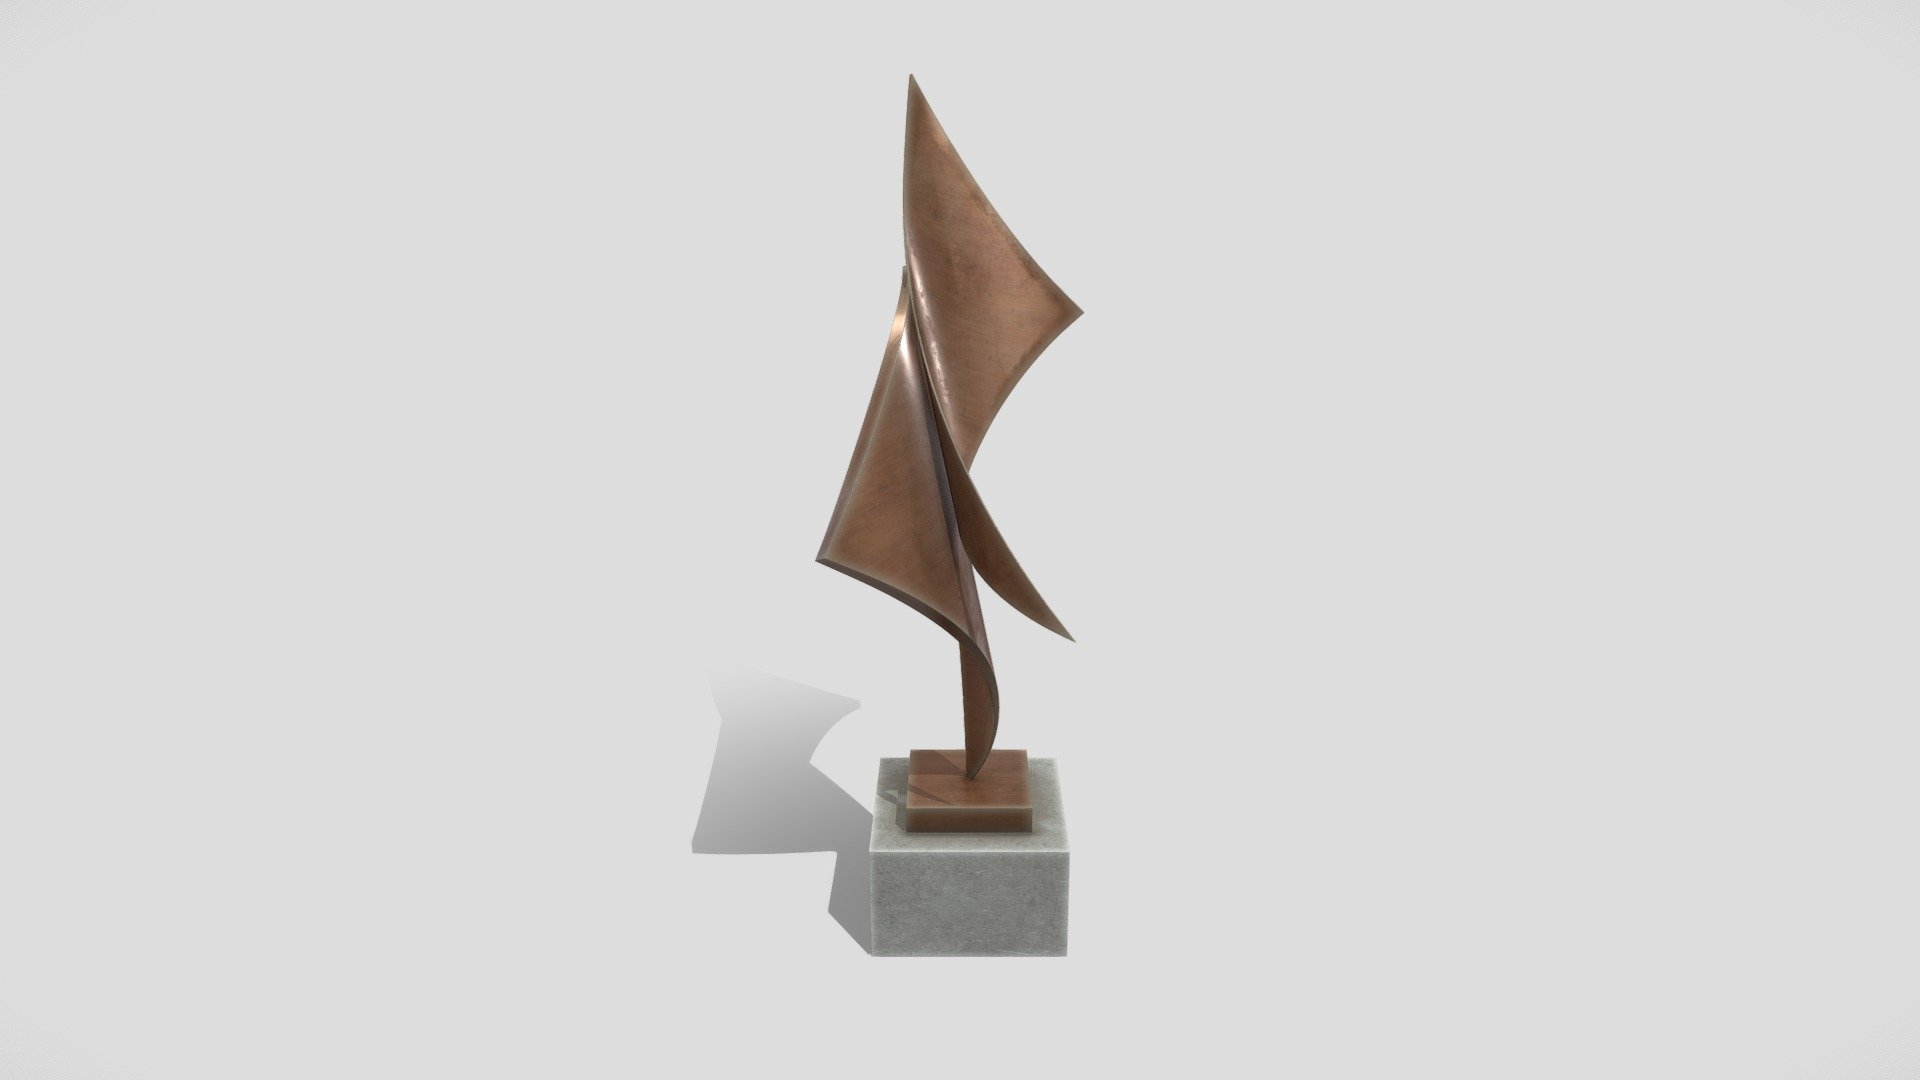 Modern Decorative Abstract Copper Art Sculpture 15

Modern abstract shapes in tandem with classy materials will make any space vivid.

Dimensions: 125 x 87 x H 300,5 cm

Material: Copper, concrete

3D models: .3DS, .FBX, .OBJ - Abstract Copper Art Sculpture 15 - 3D model by gogoskilla 3d model